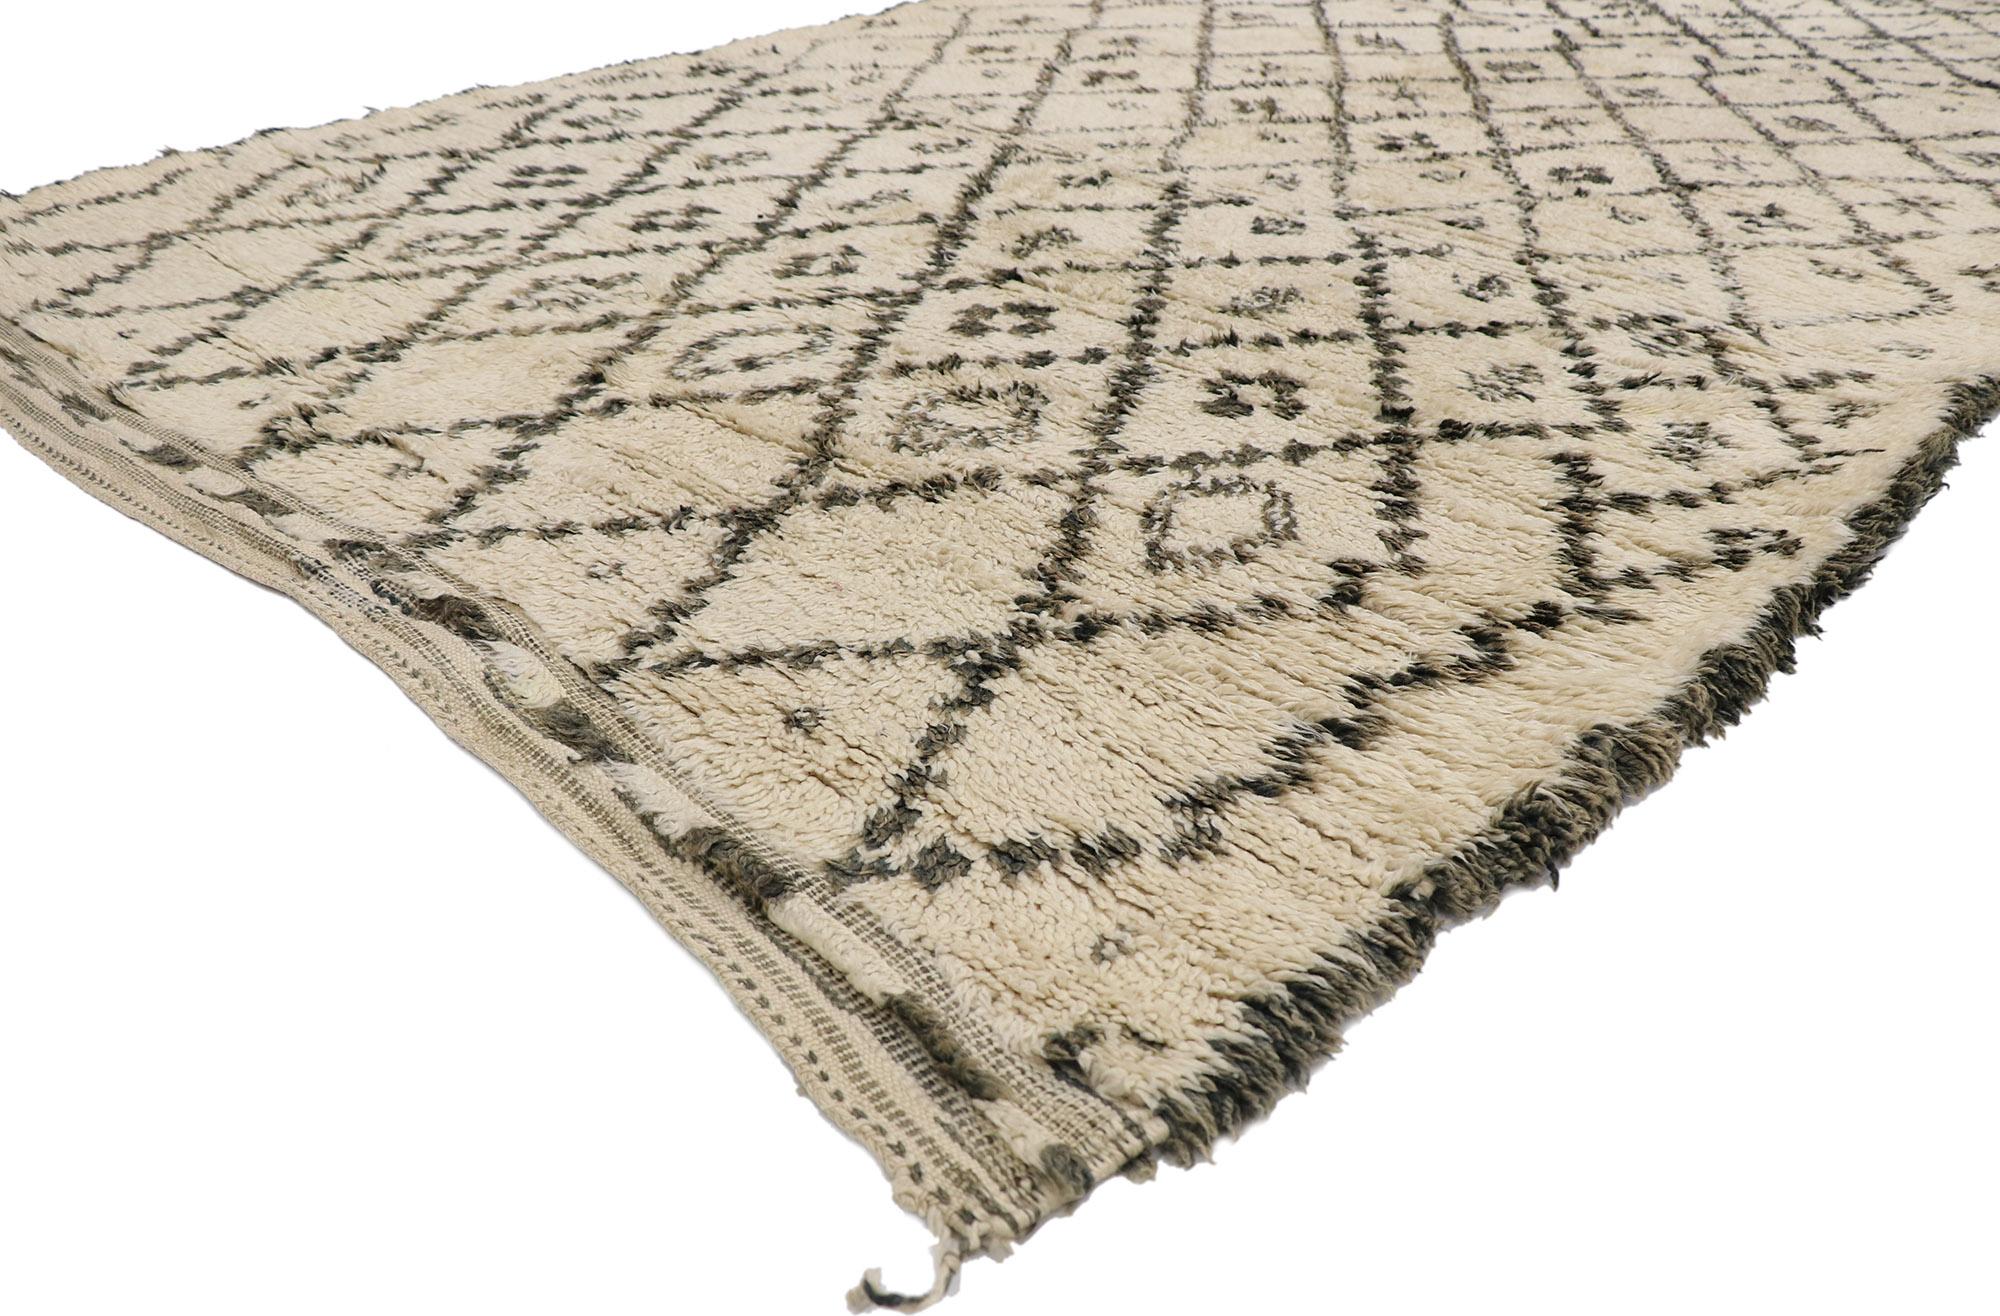 21393 vintage Berber Beni Ourain Moroccan rug with Tribal style 06'06 x 11'07. With its simplicity, plush pile and tribal style, this hand knotted wool vintage Berber Beni Ourain Moroccan rug is a captivating vision of woven beauty. It features a